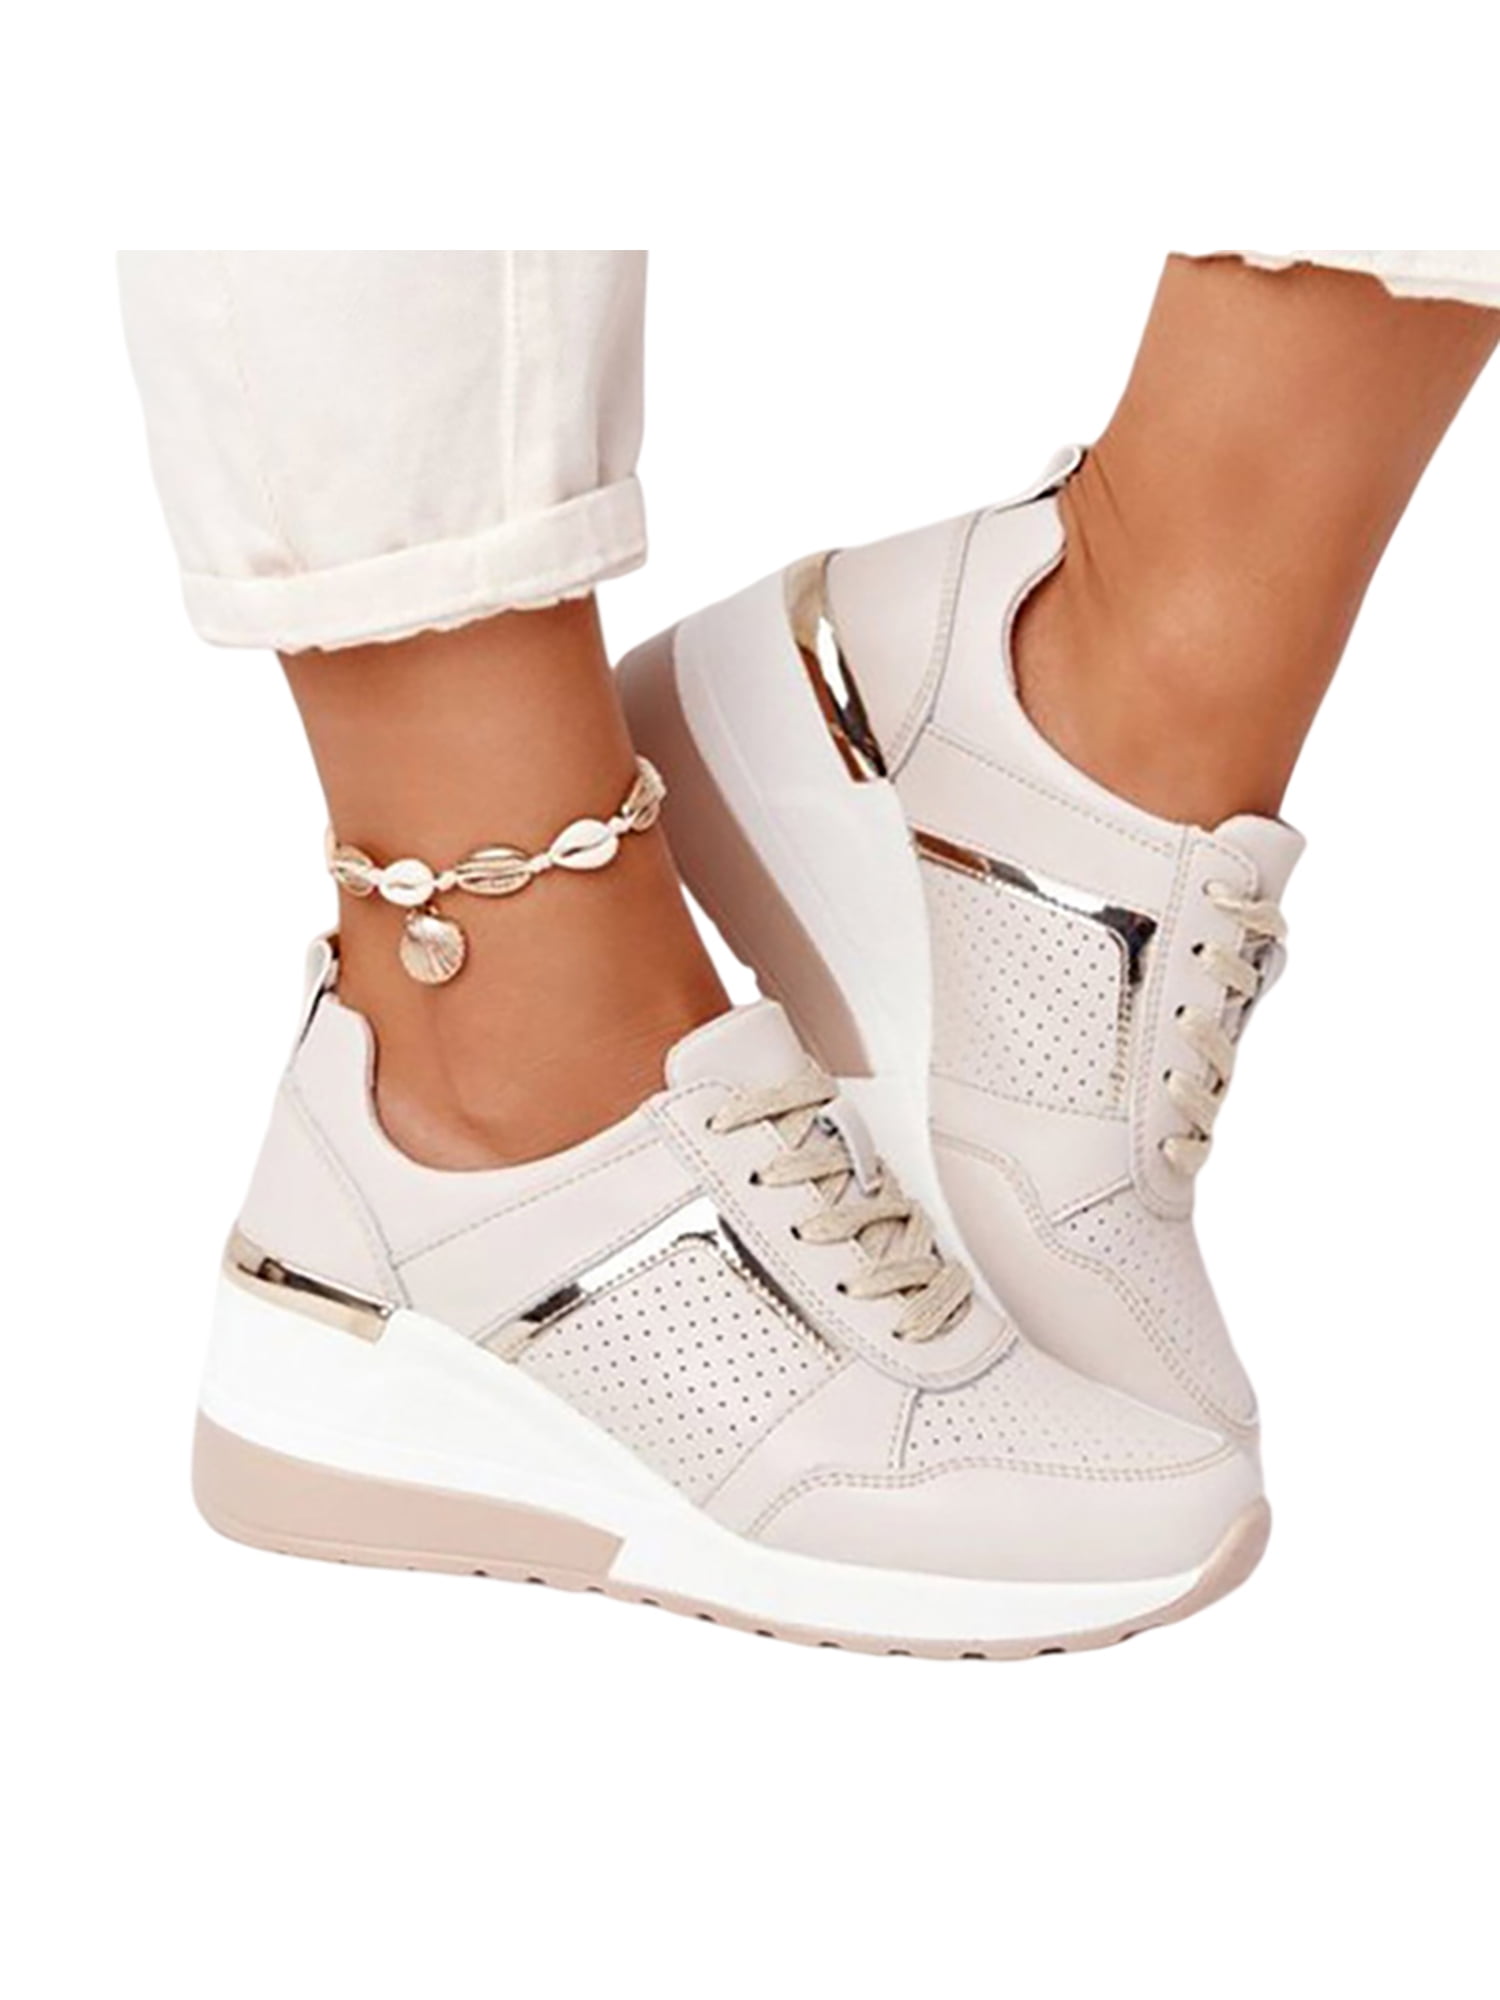 Womens Trainer Rivets Hidden Wedge Heel  Leisure High Top Shoes Lace Up Sneakers 